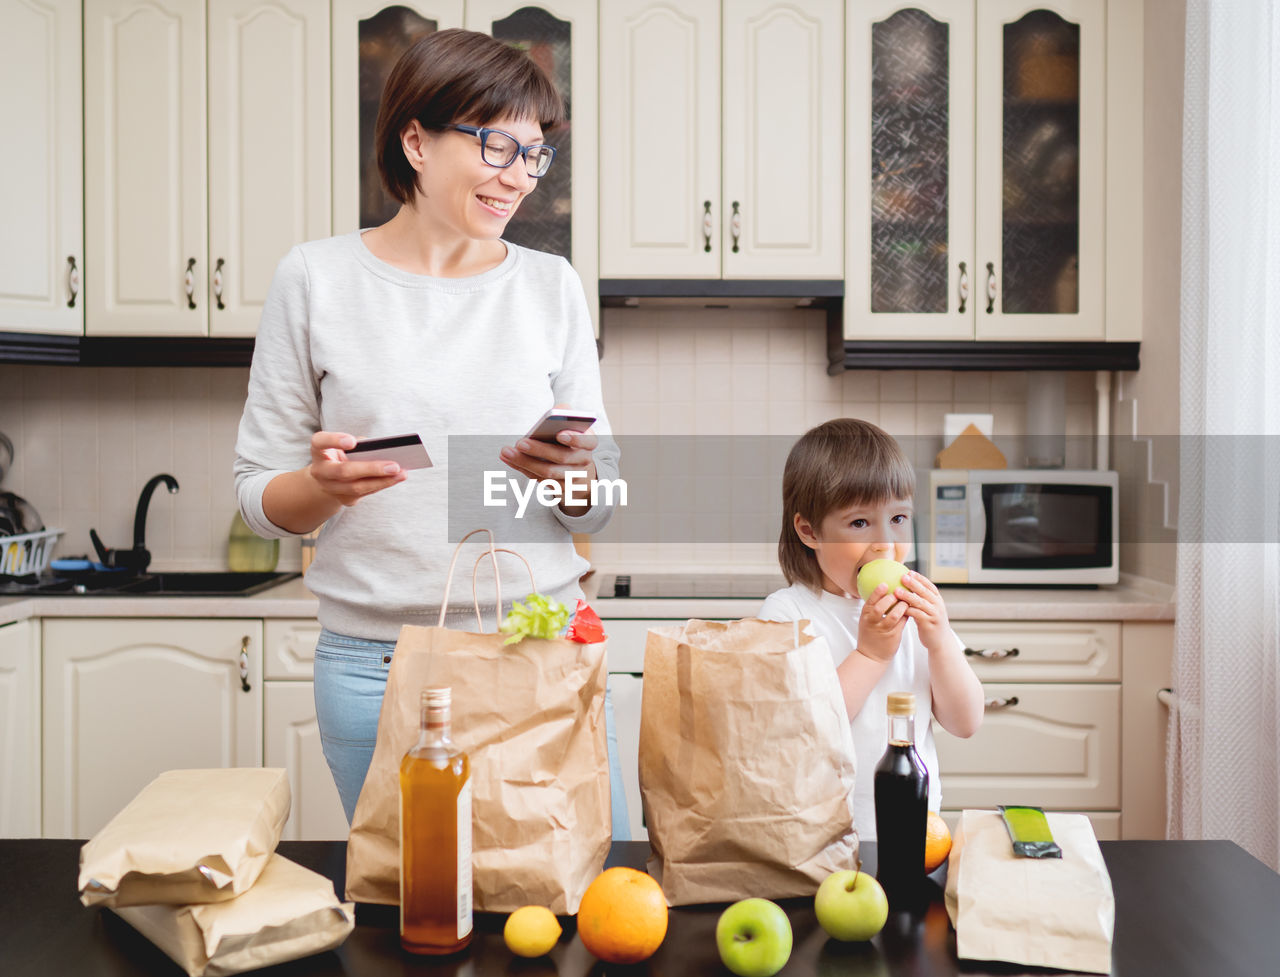 Woman and boy sorts out purchases. kid bites an apple.grocery delivery in paper bags.mother and son.